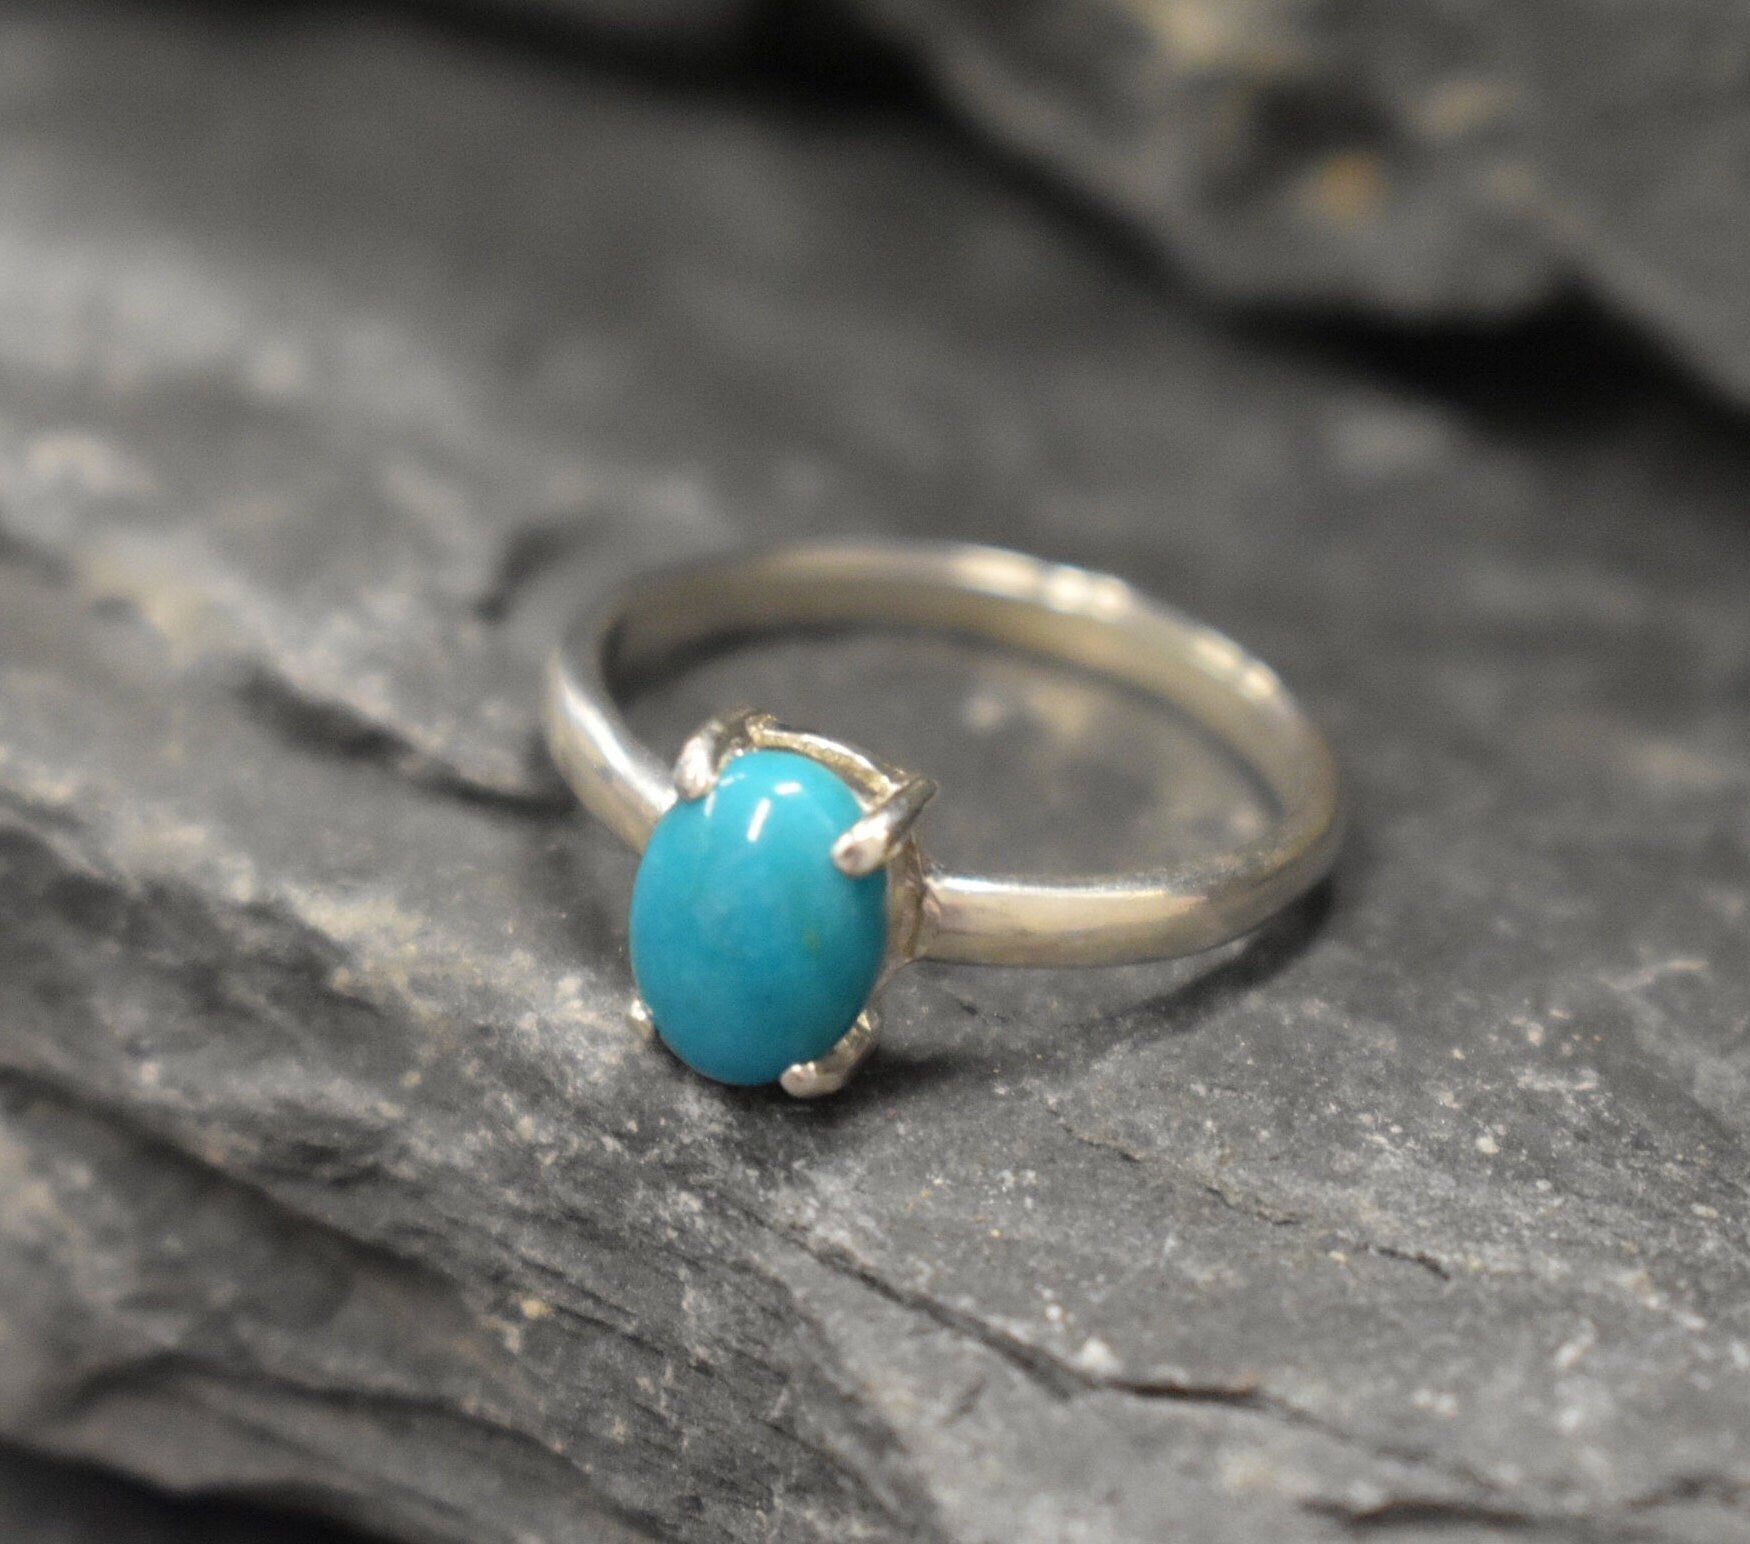 Gold Turquoise Ring, Natural Turquoise, Dainty Blue Ring, December Birthstone, 2 Carat Ring, Solitaire Ring, Gold Vermeil, Arizona Turquoise